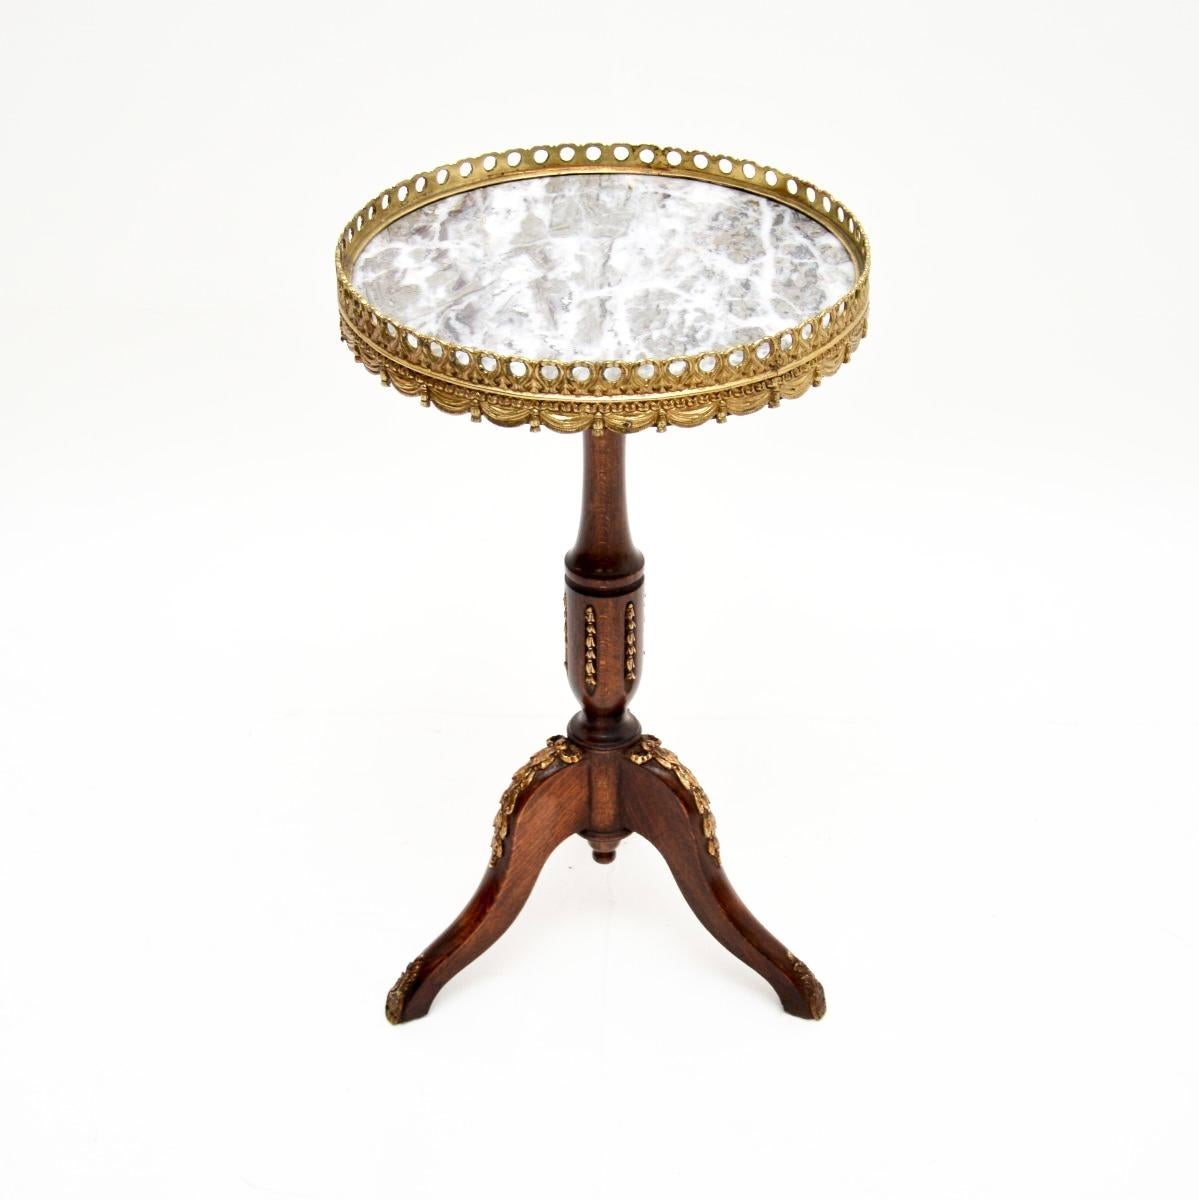 A beautiful and very well made antique French marble top wine table, dating from around the 1930’s.

This is of superb quality, it is very sturdy and is a useful size. The solid wood frame has high quality ormolu mounts and a gorgeous pierced ormolu